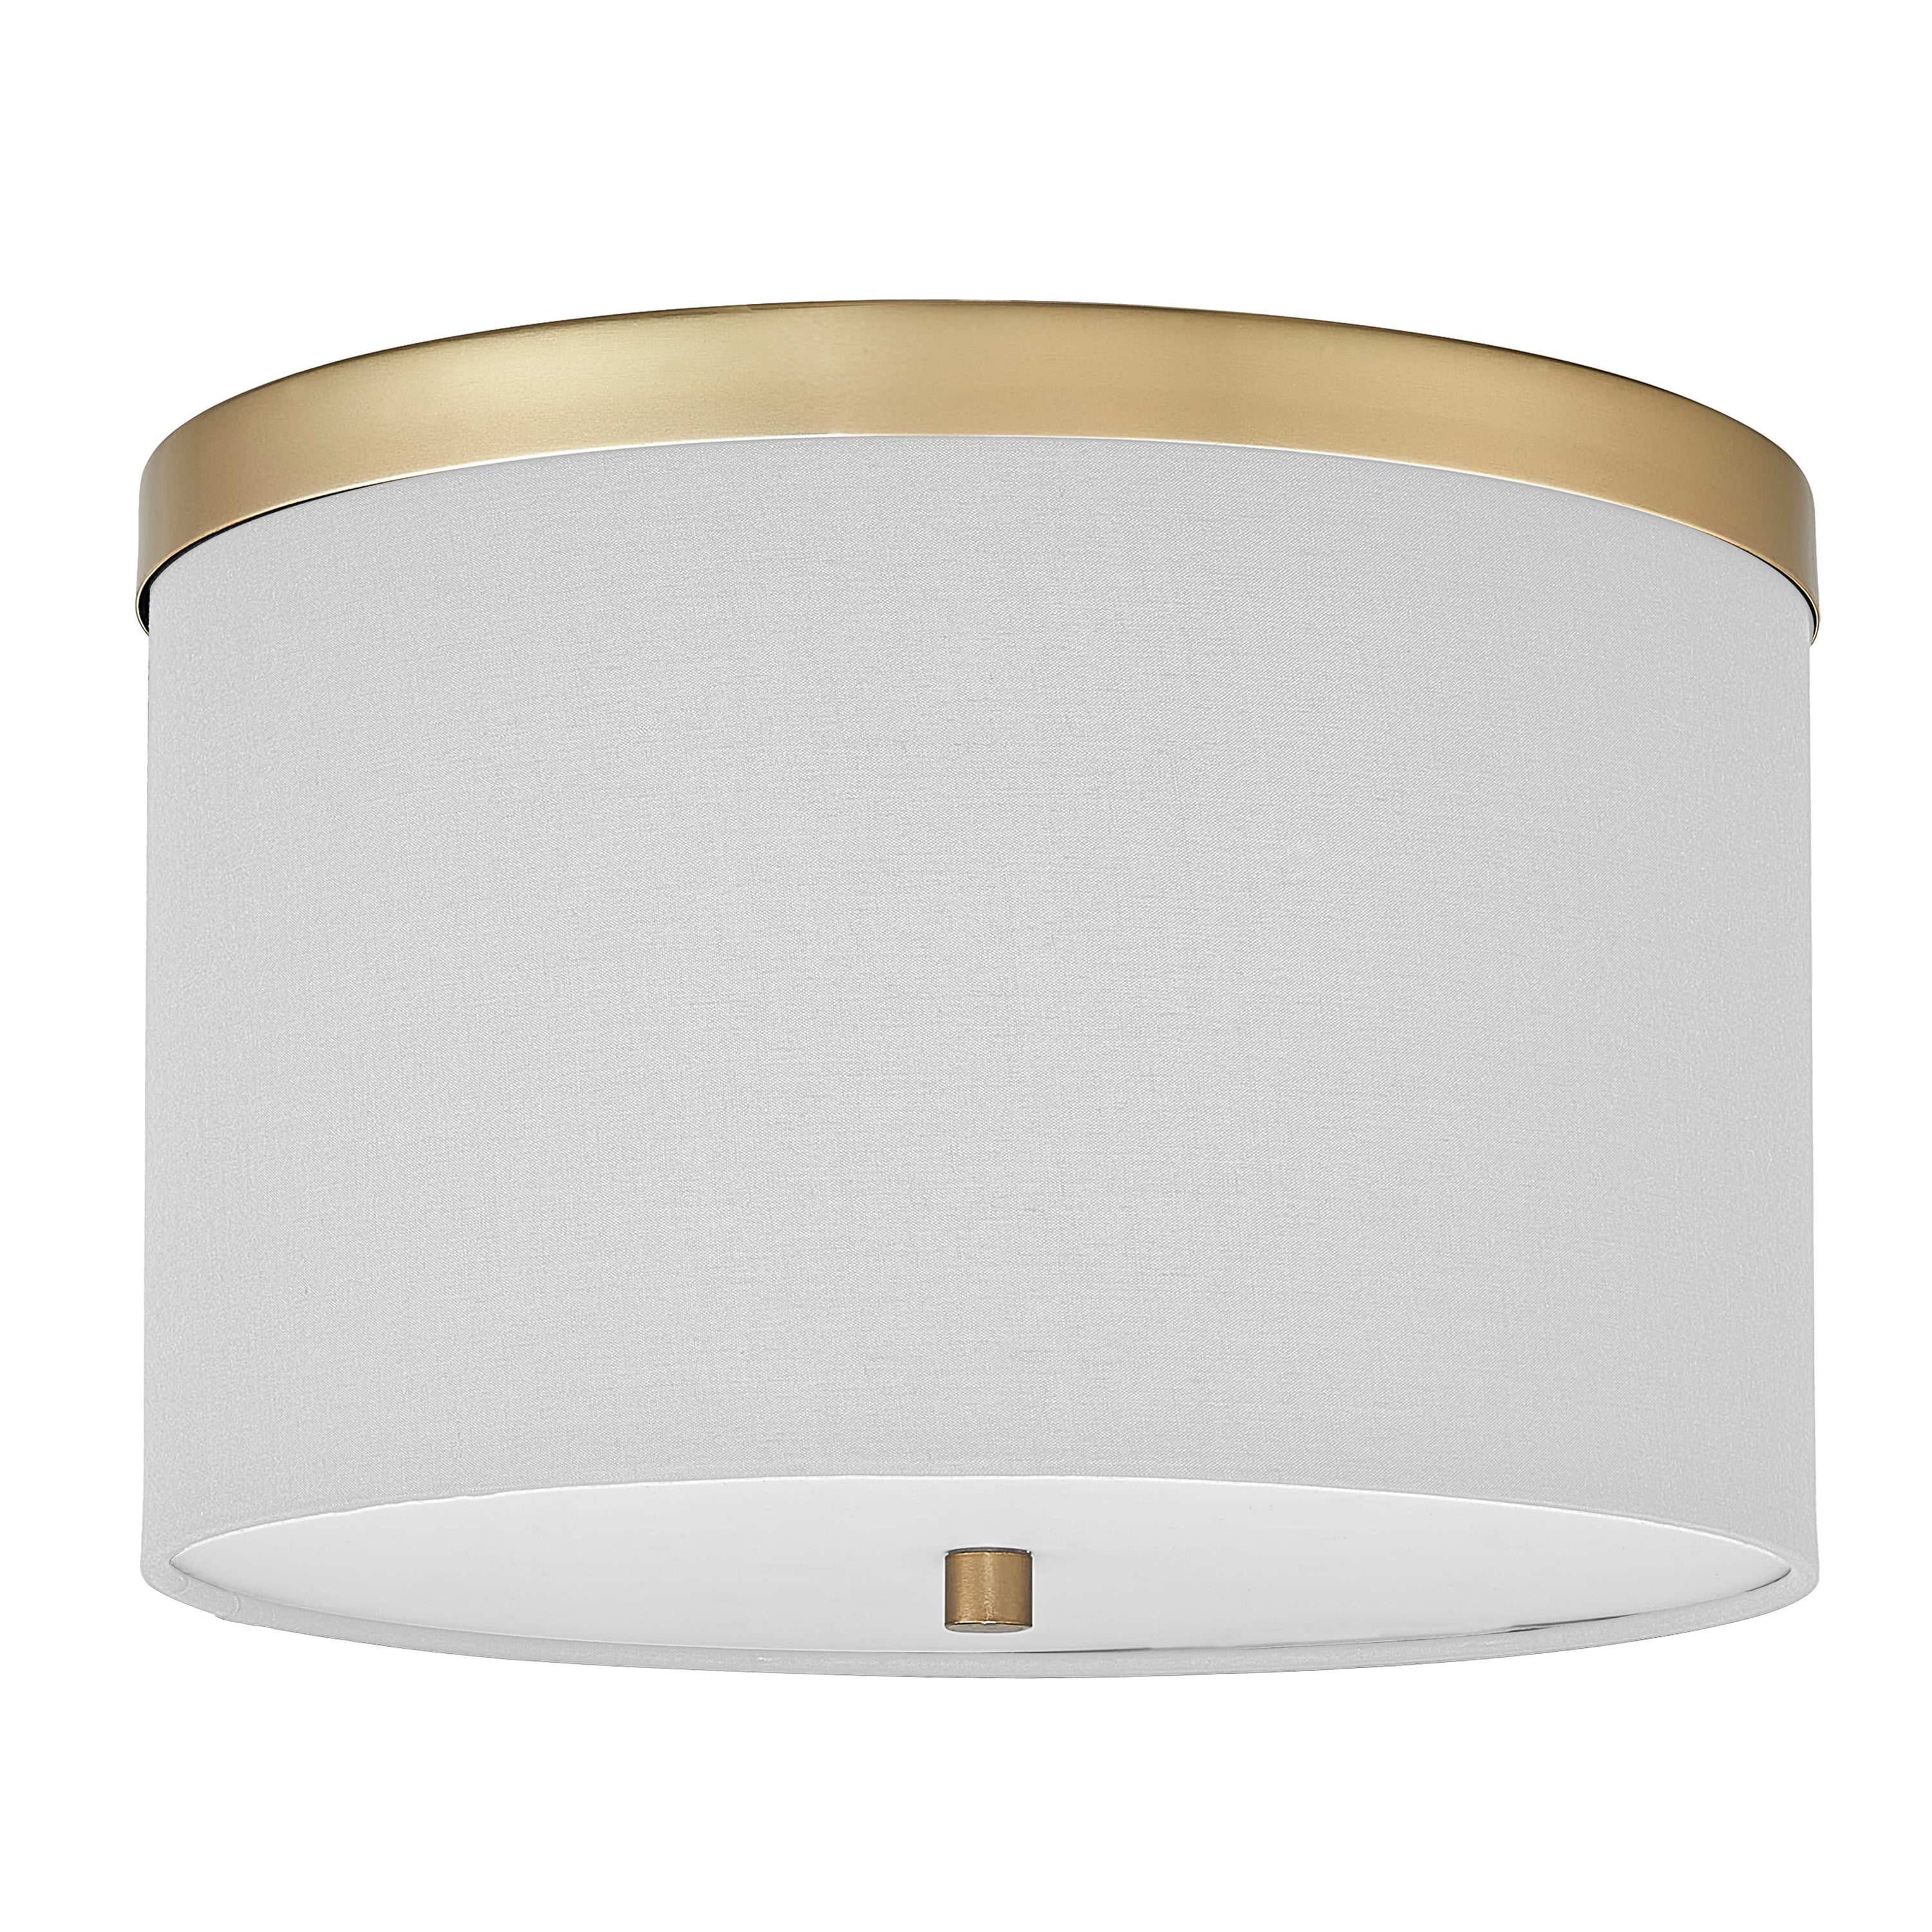 Dainolite FRD-122FH-AGB-WH 2 Light Incandescent Flush Mount Aged Brass with White Shade